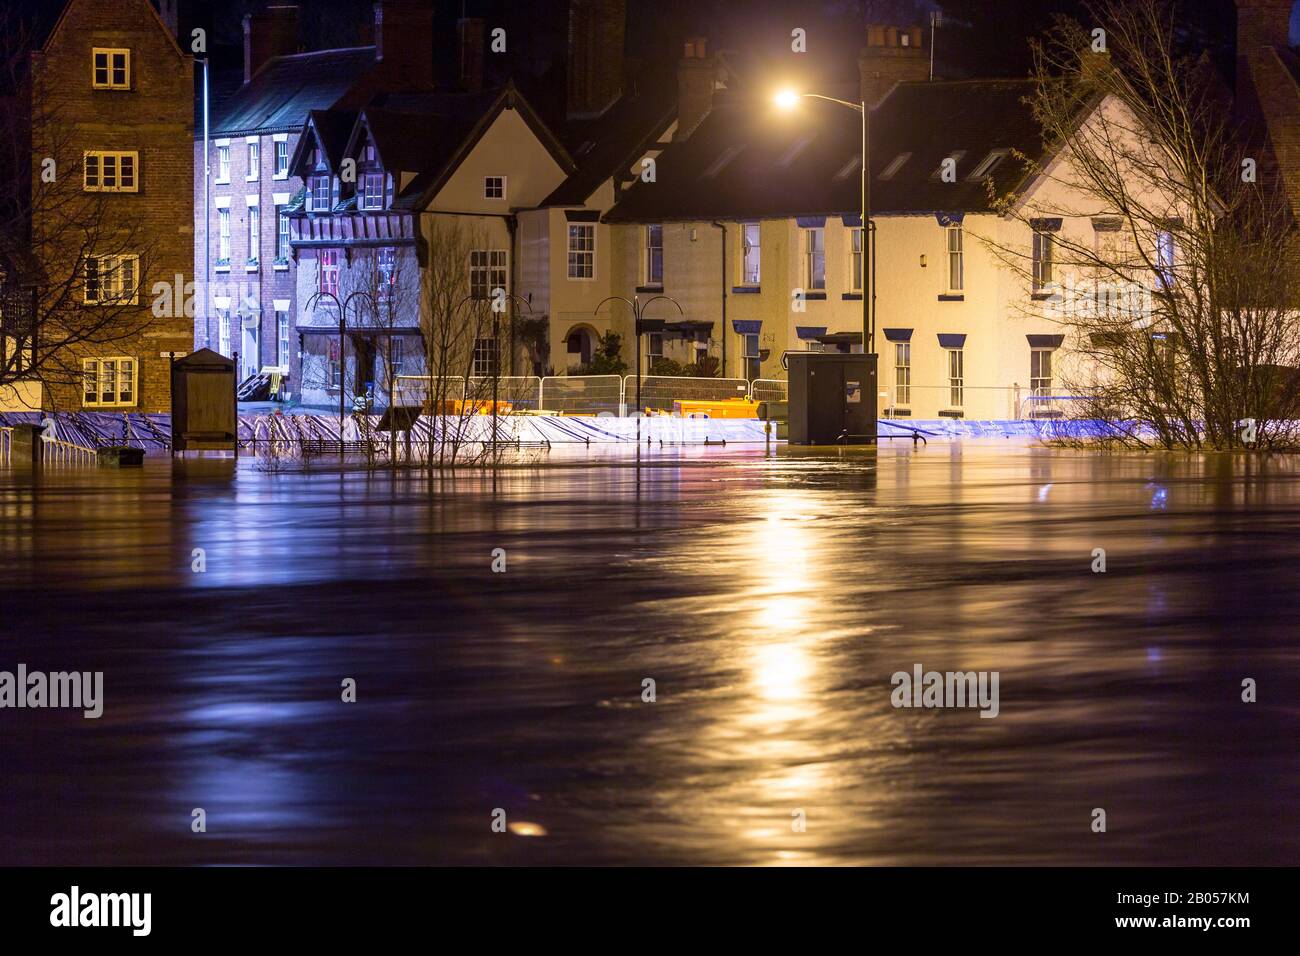 Bewdley, Worcestershire, UK. 18th Feb, 2020. The River Severn at Bewdley, Worcestershire is rising and is just about being held back by the flood defences along the riverside. The night time exposures show the river flowing very fast. Credit: Peter Lopeman/Alamy Live News Stock Photo